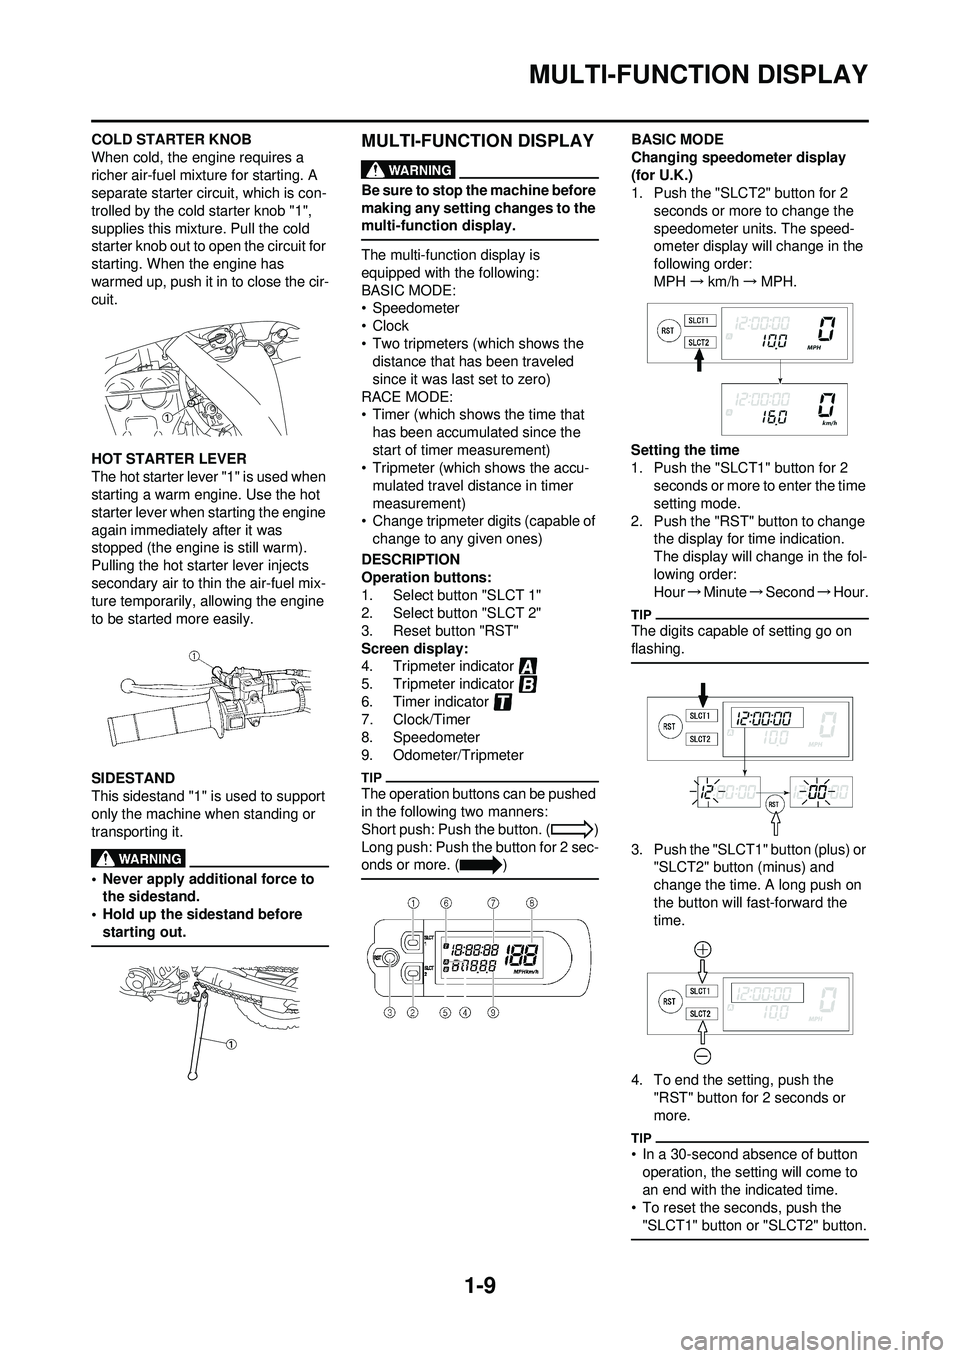 YAMAHA WR 250F 2009  Owners Manual 1-9
MULTI-FUNCTION DISPLAY
COLD STARTER KNOB
When cold, the engine requires a 
richer air-fuel mixture for starting. A 
separate starter circuit, which is con-
trolled by the cold starter knob "1", 
s